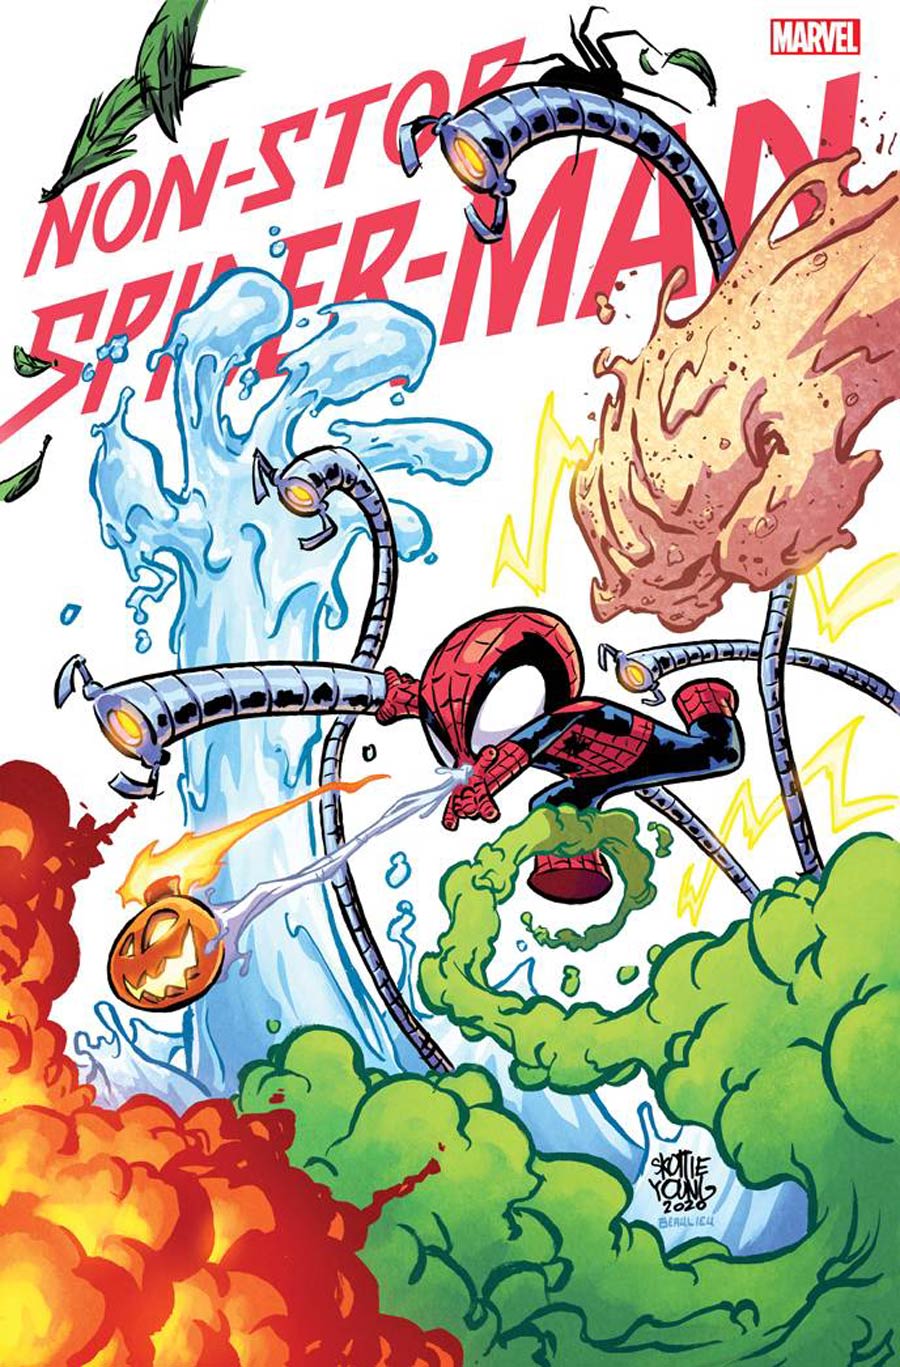 Non-Stop Spider-Man #1 Cover E Variant Skottie Young Cover